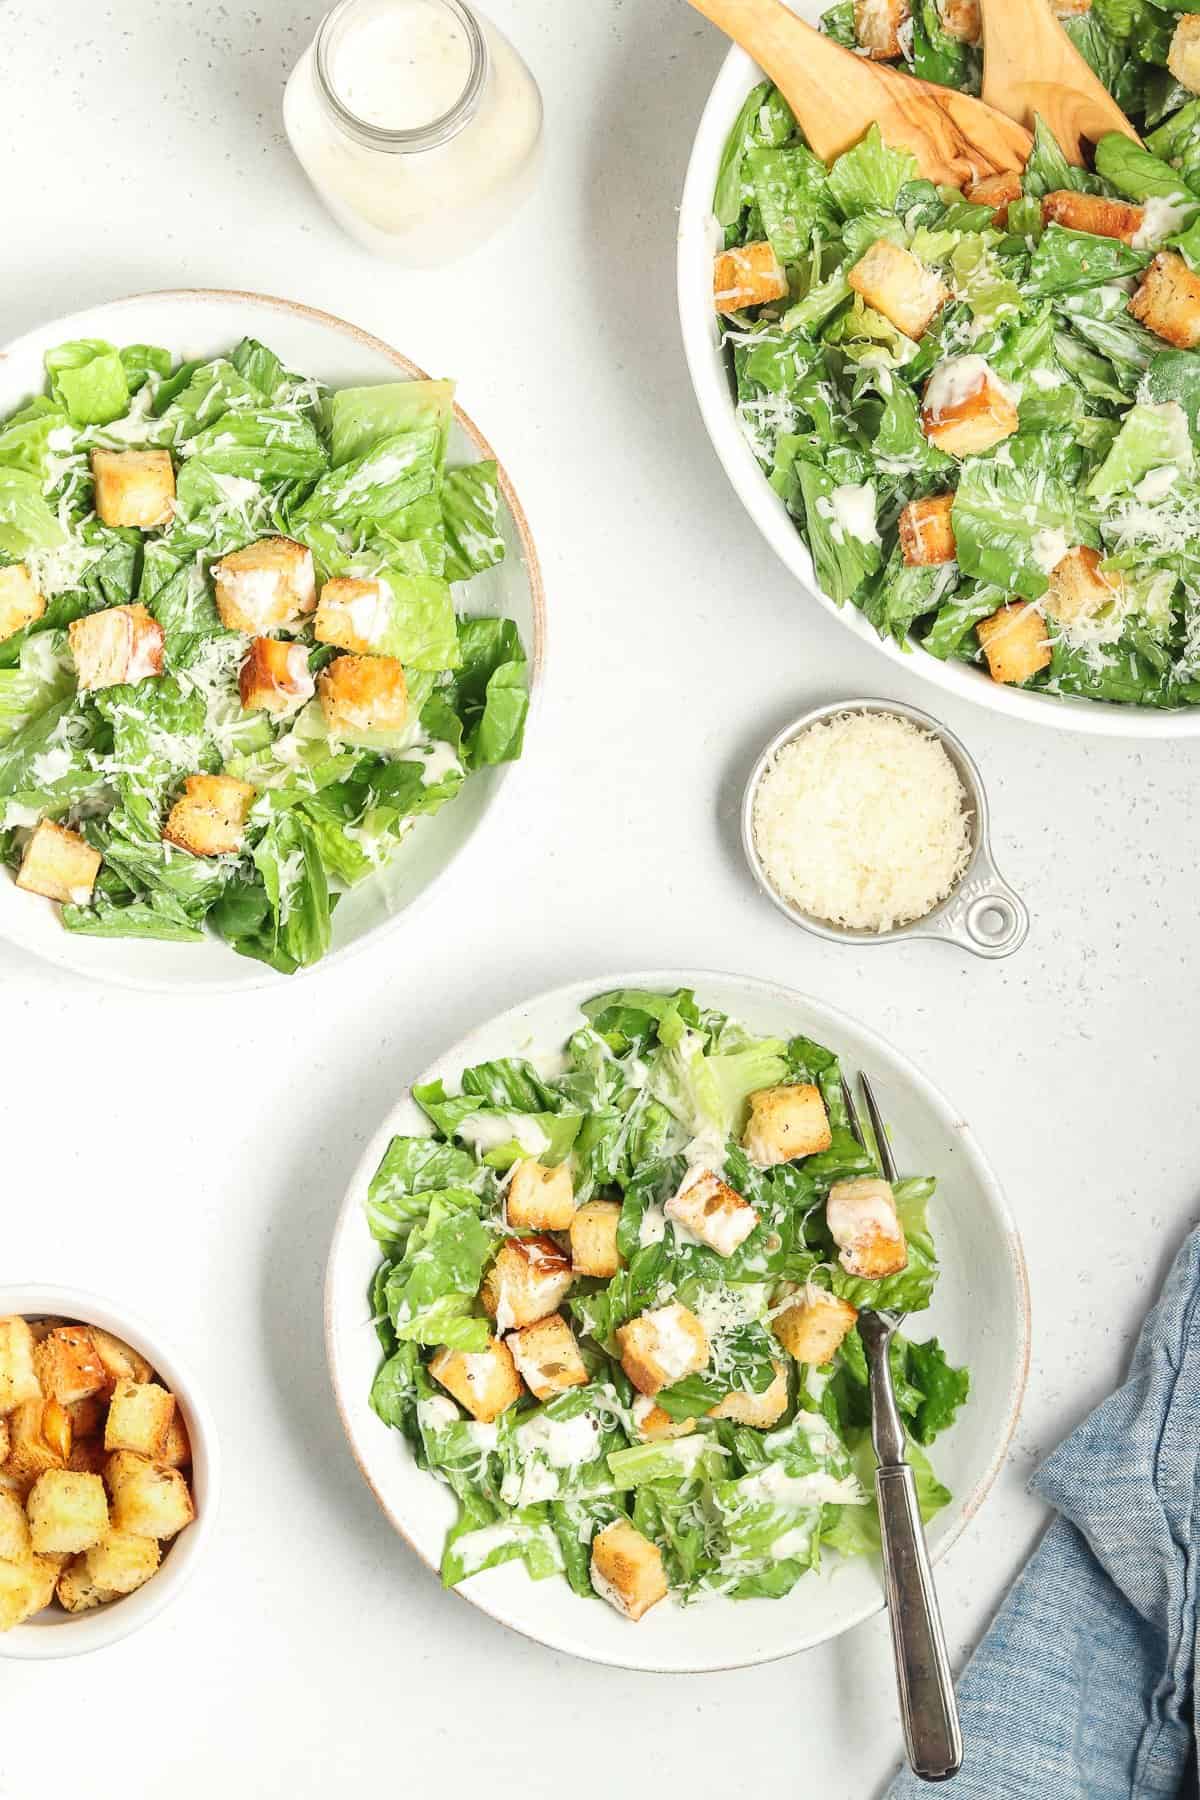 Full overhead view of 3 bowls filled with vegan caesar salad. Croutons, blue napkin and parmesan on the side.